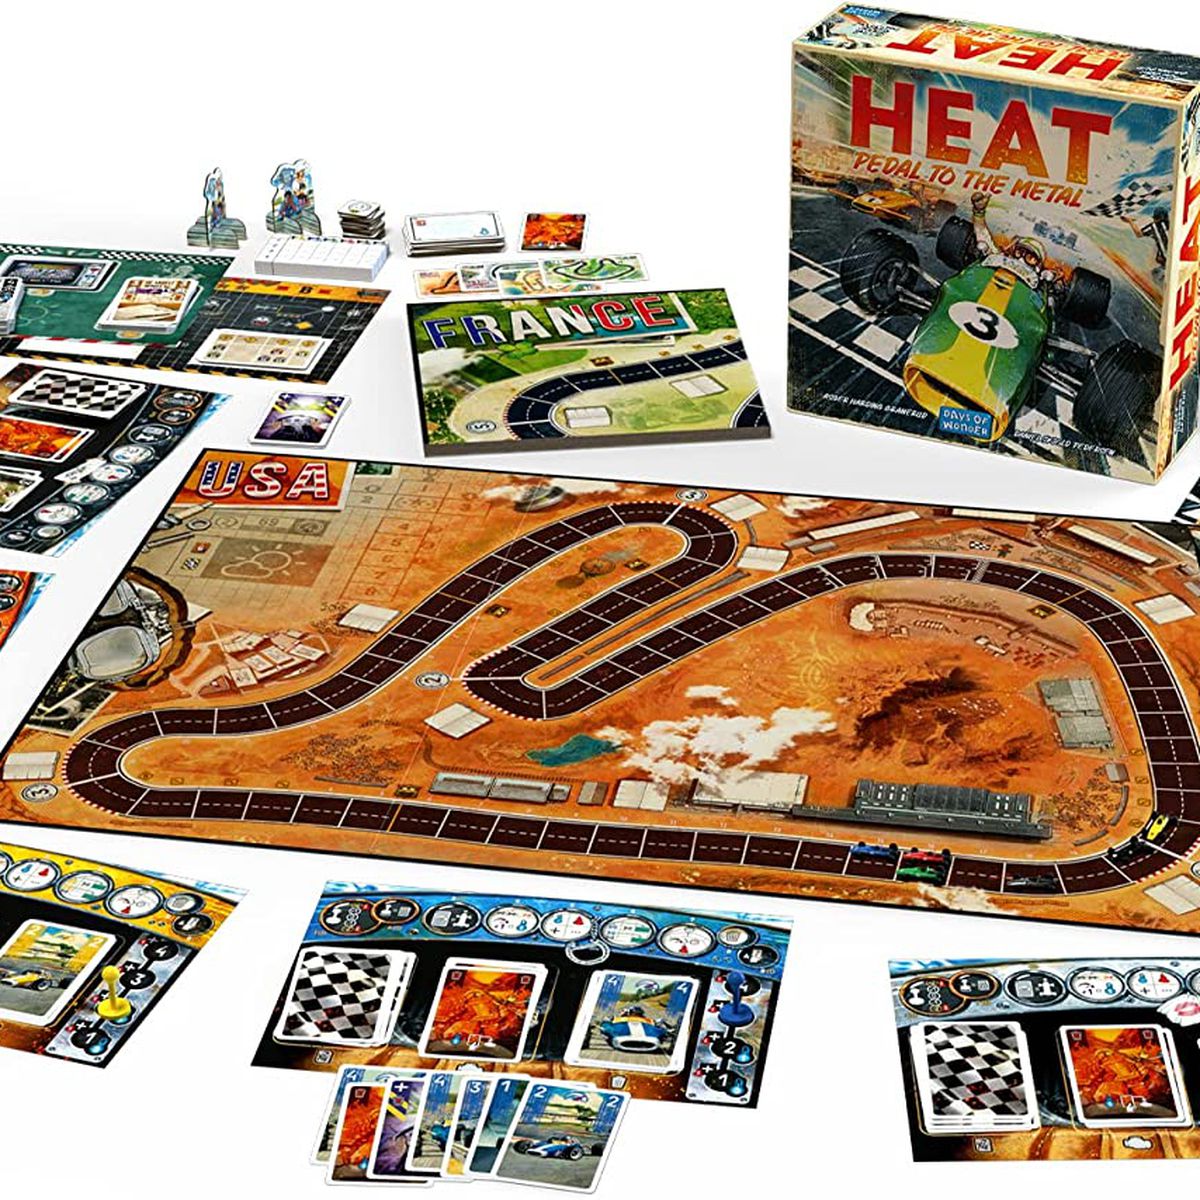 The component for Heat, including a modular track and plastic cars, laid out for display.